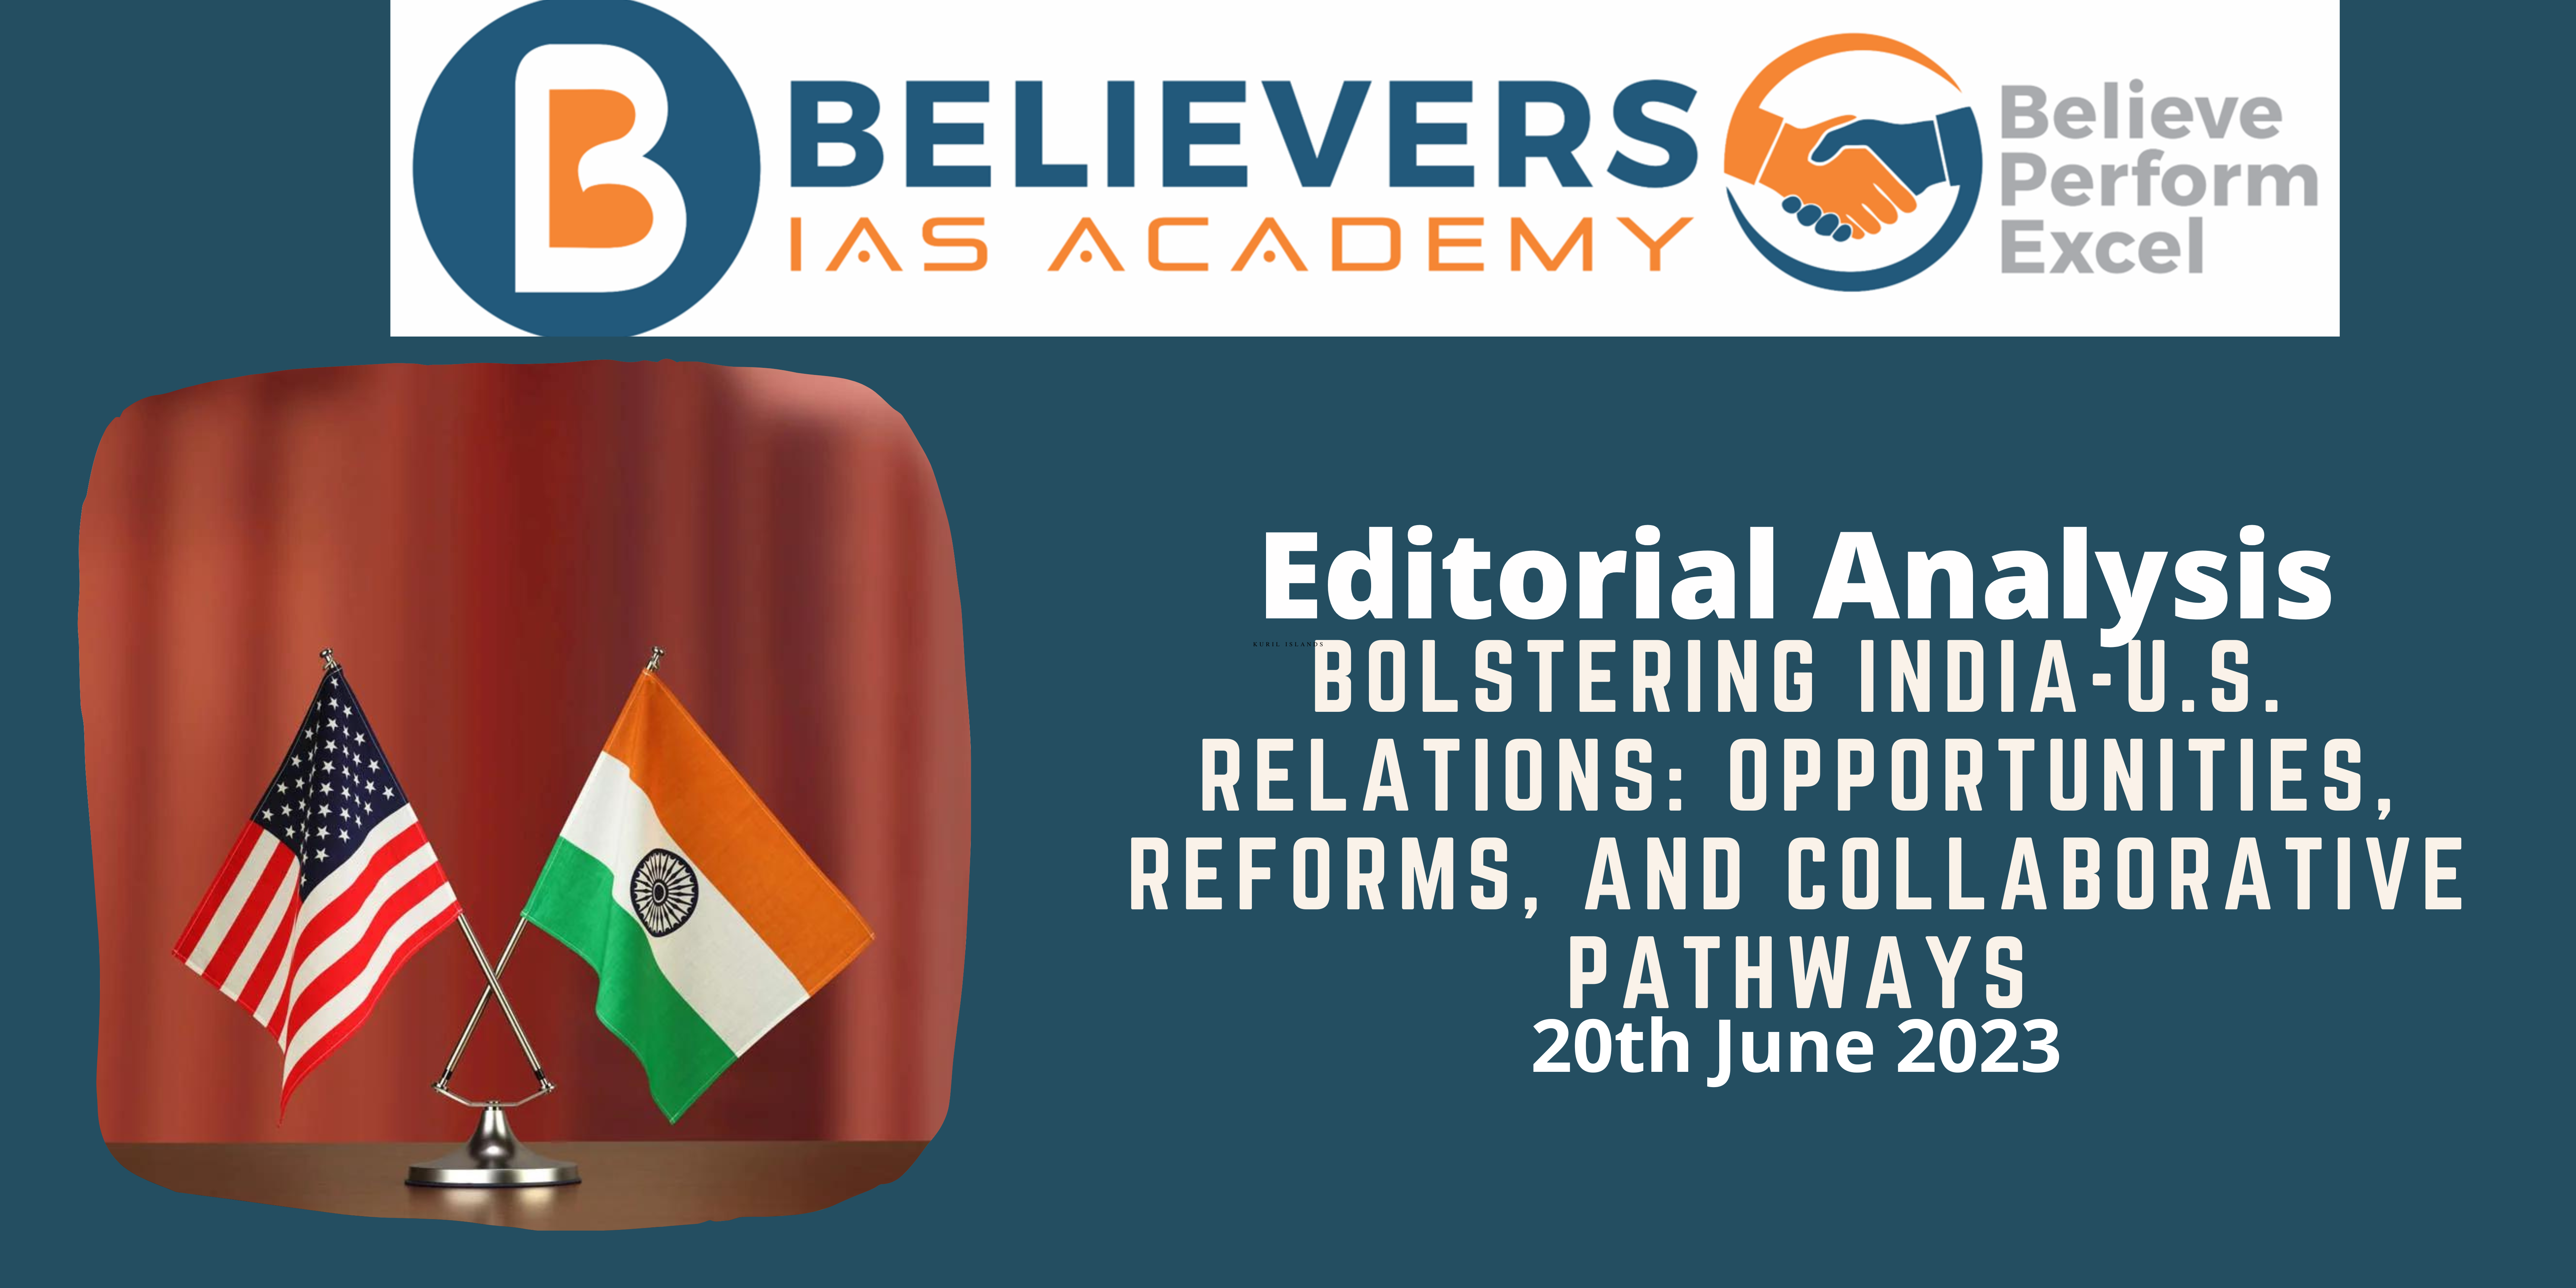 Bolstering India-U.S. Relations: Opportunities, Reforms, and Collaborative Pathways